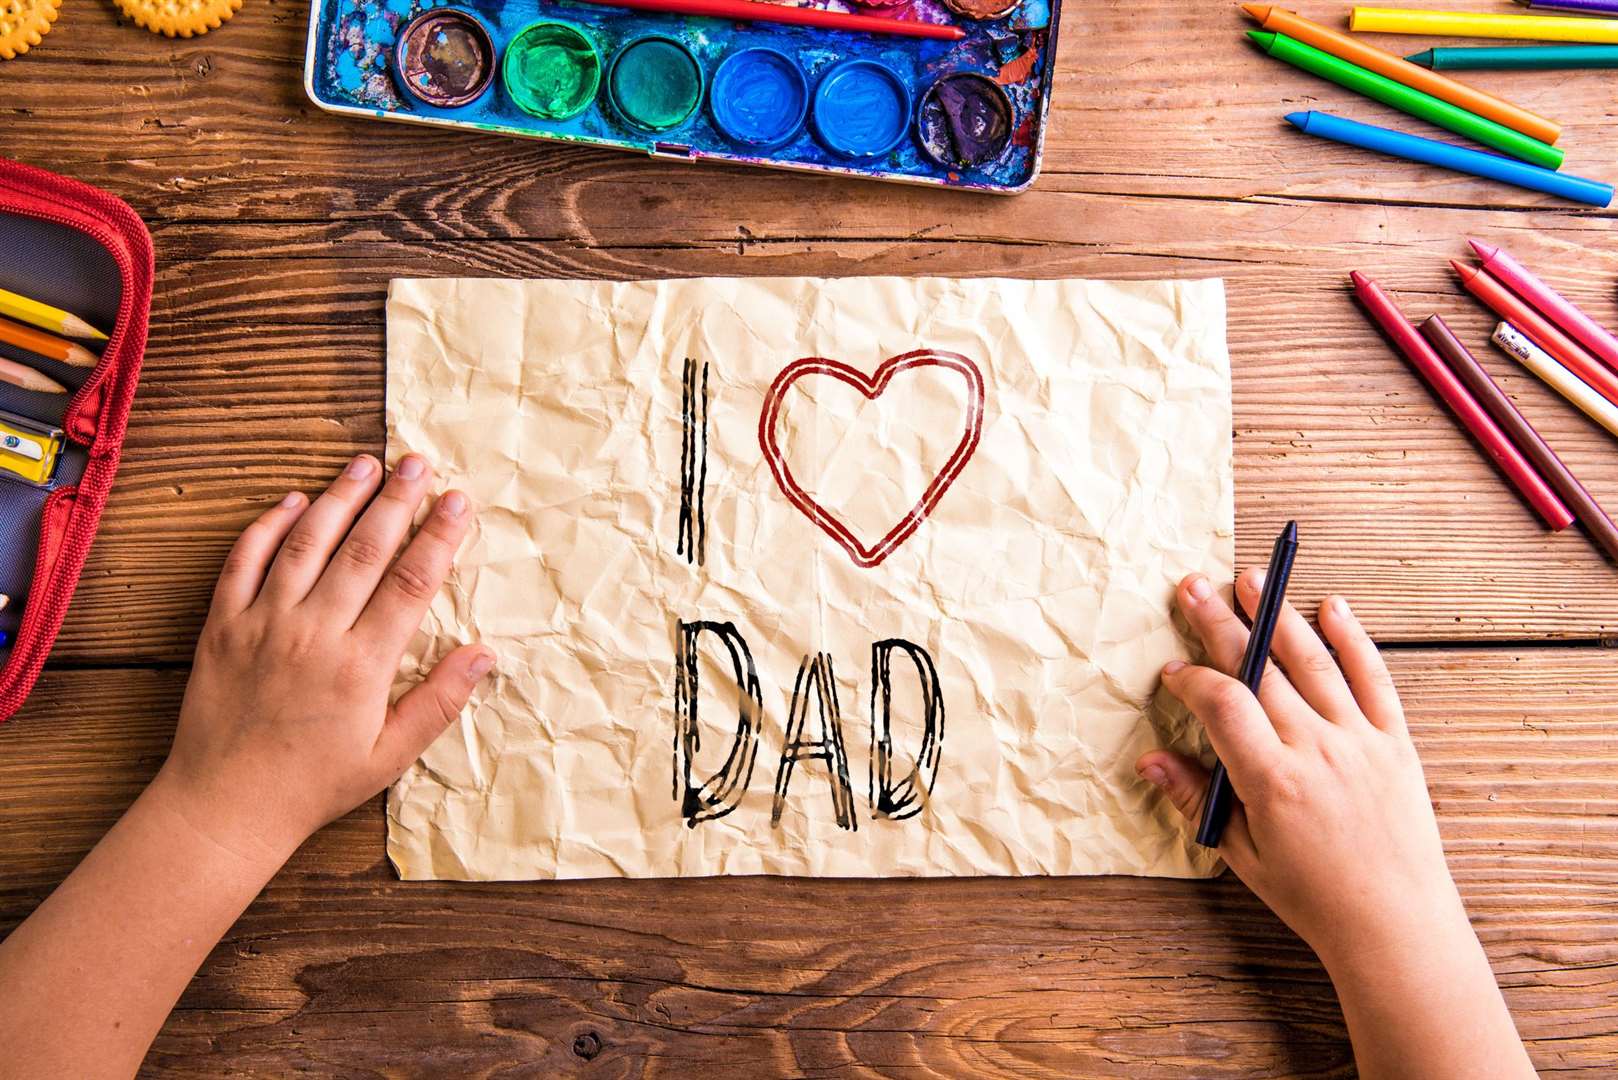 Children have been sending us their drawings and messages for Father's Day